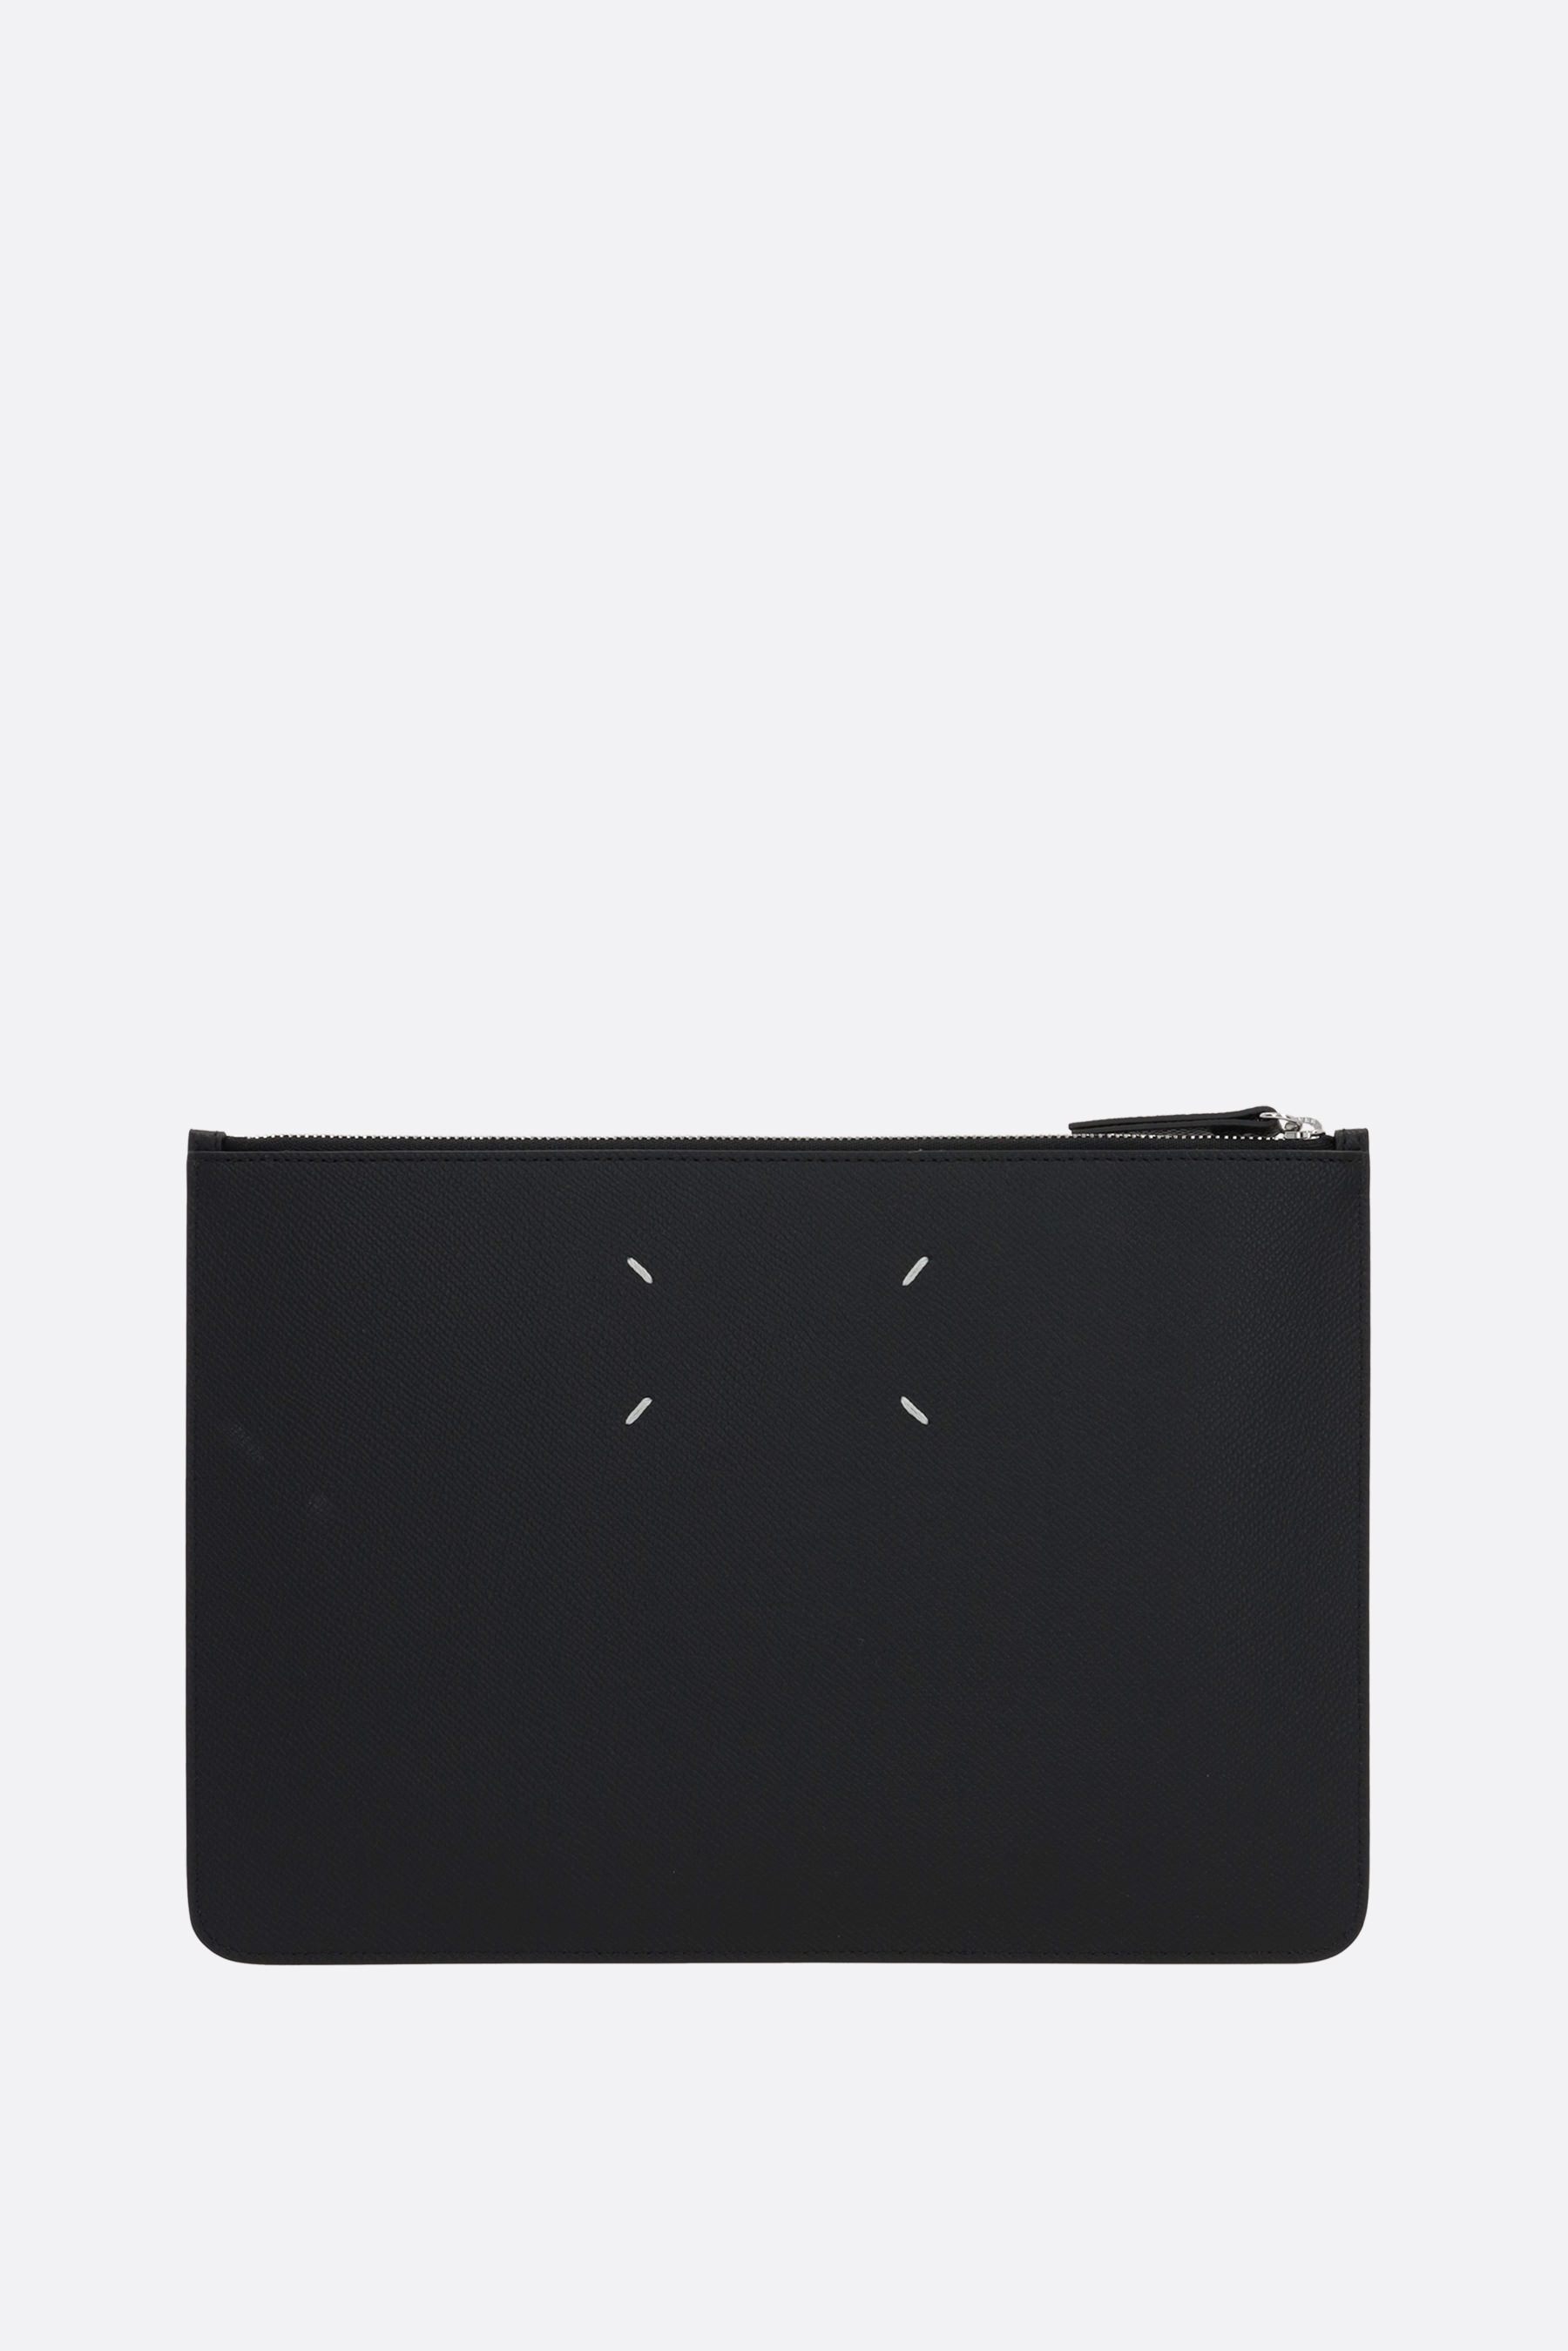 FOUR STITCHES SMALL TEXTURED LEATHER CLUTCH - 3